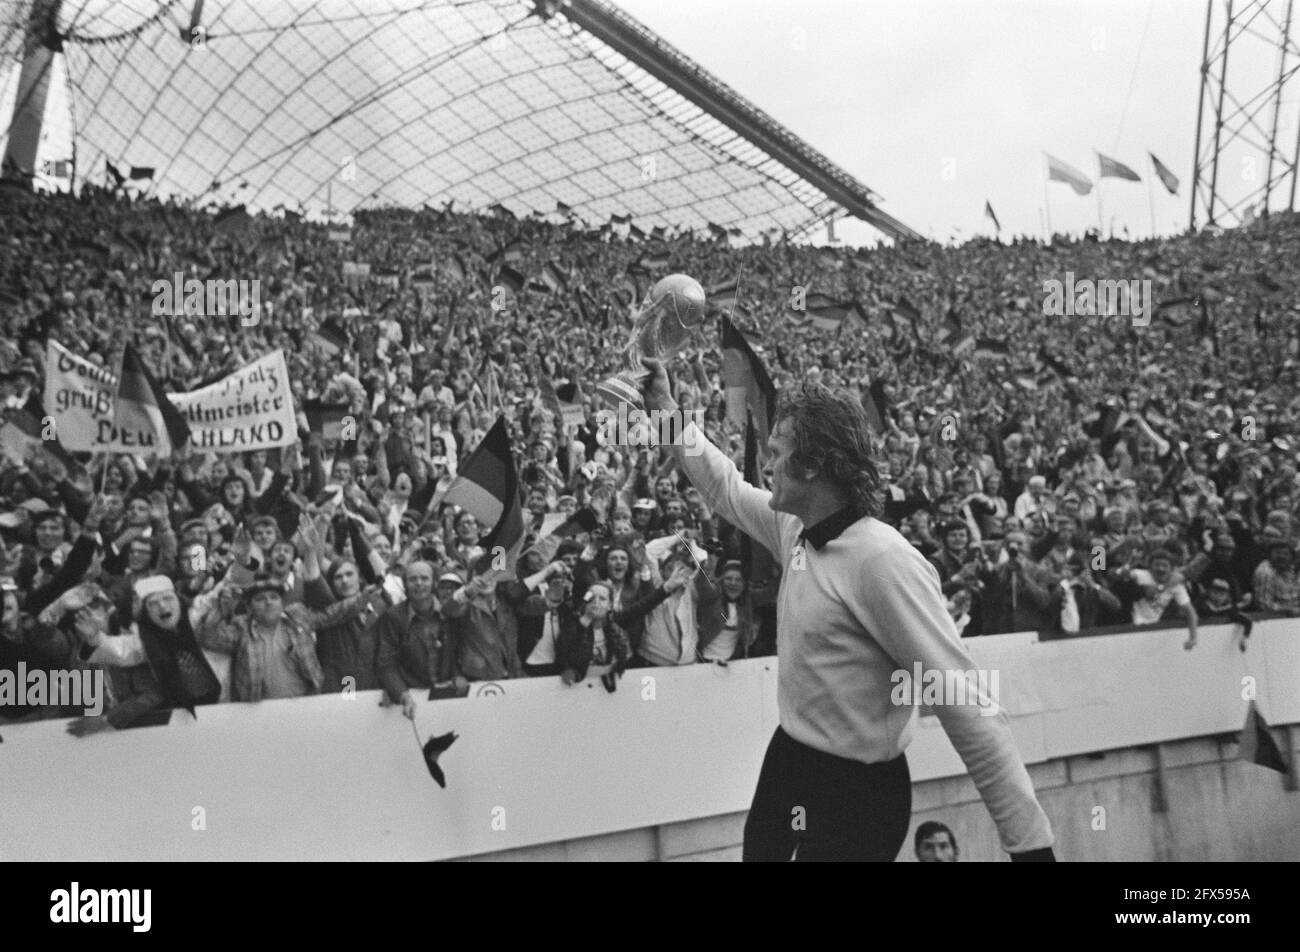 Final World Cup 1974 in Munich, West Germany v Netherlands 2-1; goalkeeper Sepp Maier with the cup, July 7, 1974, cups, finals, goalkeepers, sports, soccer, world championships, The Netherlands, 20th century press agency photo, news to remember, documentary, historic photography 1945-1990, visual stories, human history of the Twentieth Century, capturing moments in time Stock Photo